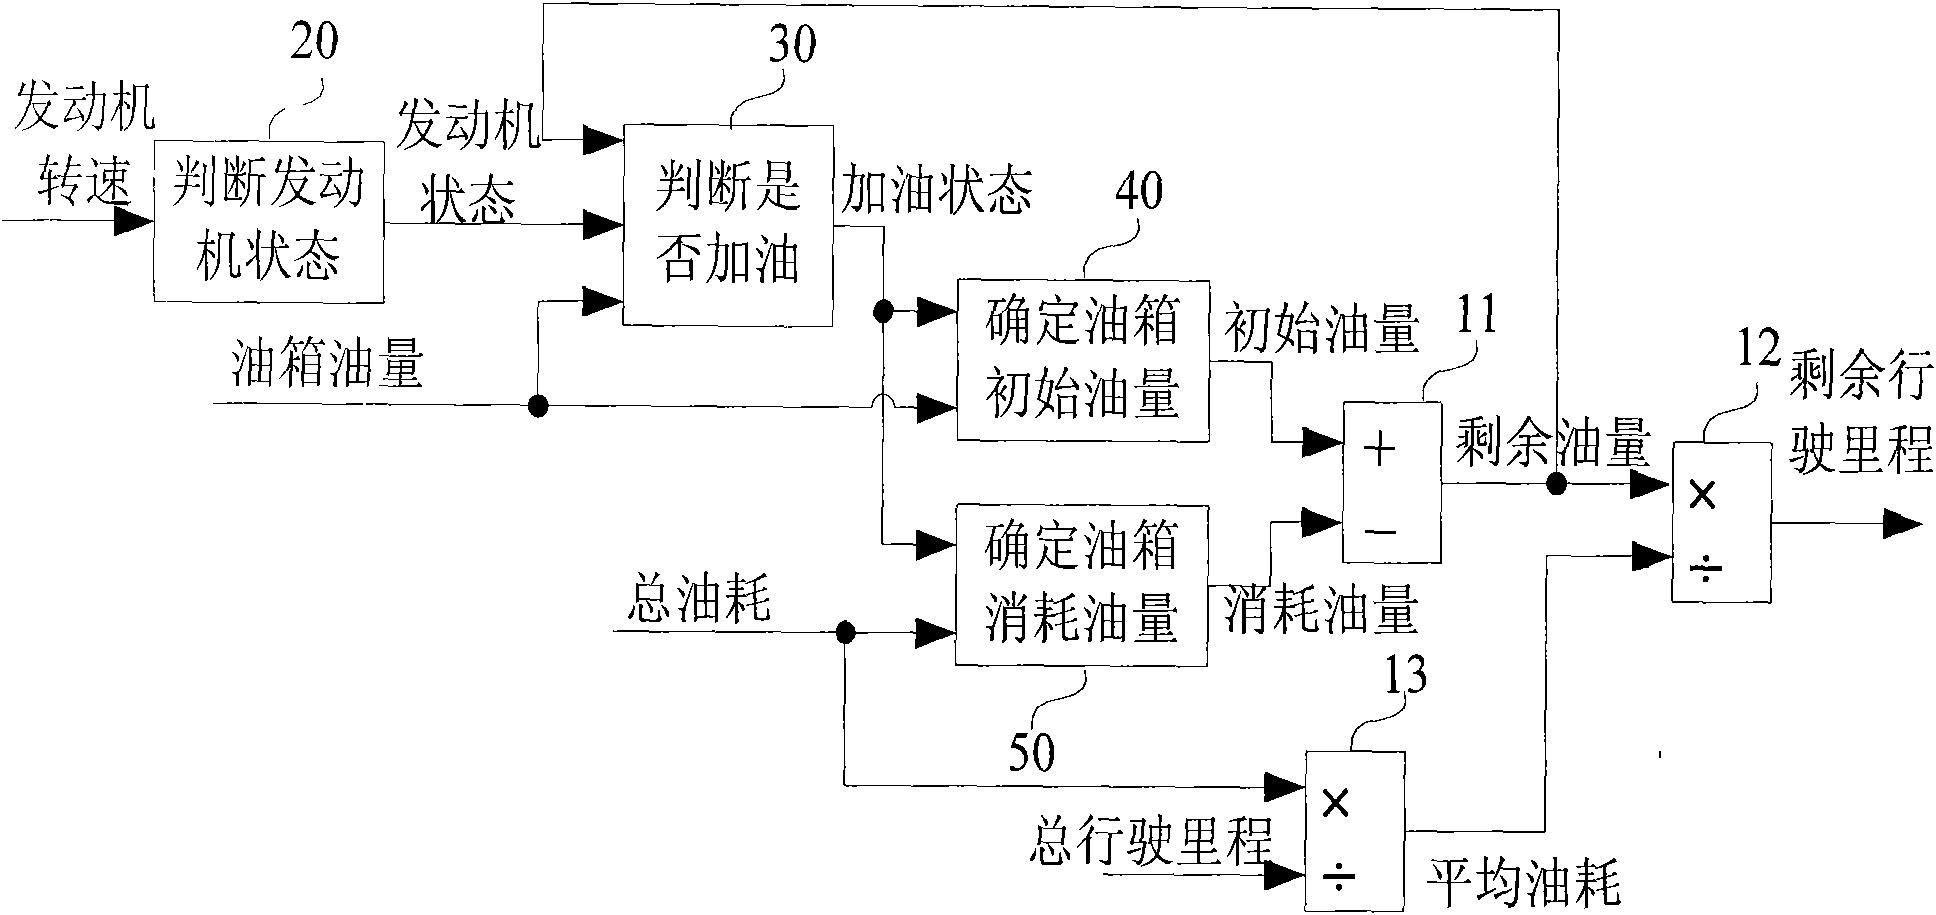 Remaining driving mileage processing method of automobile combination meter